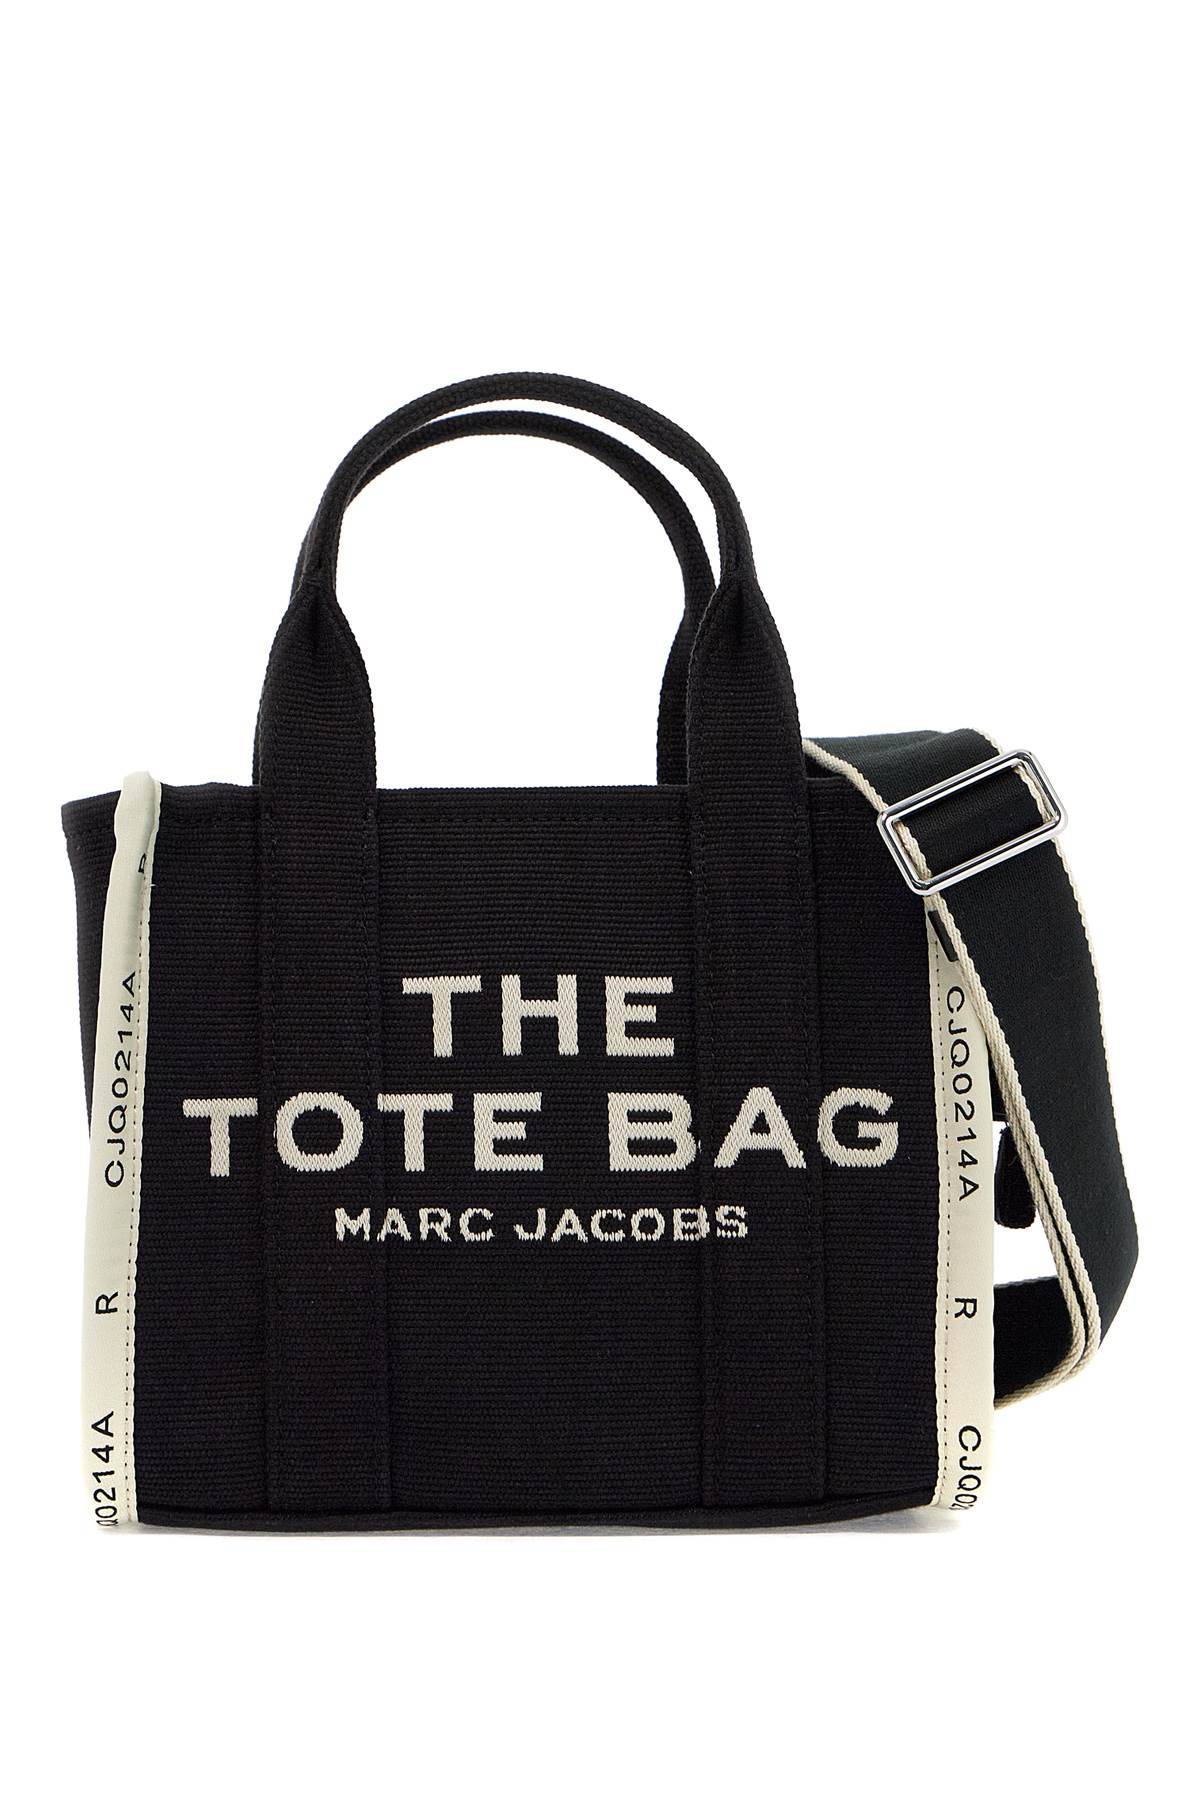 Marc Jacobs MARC JACOBS the jacquard small tote bag